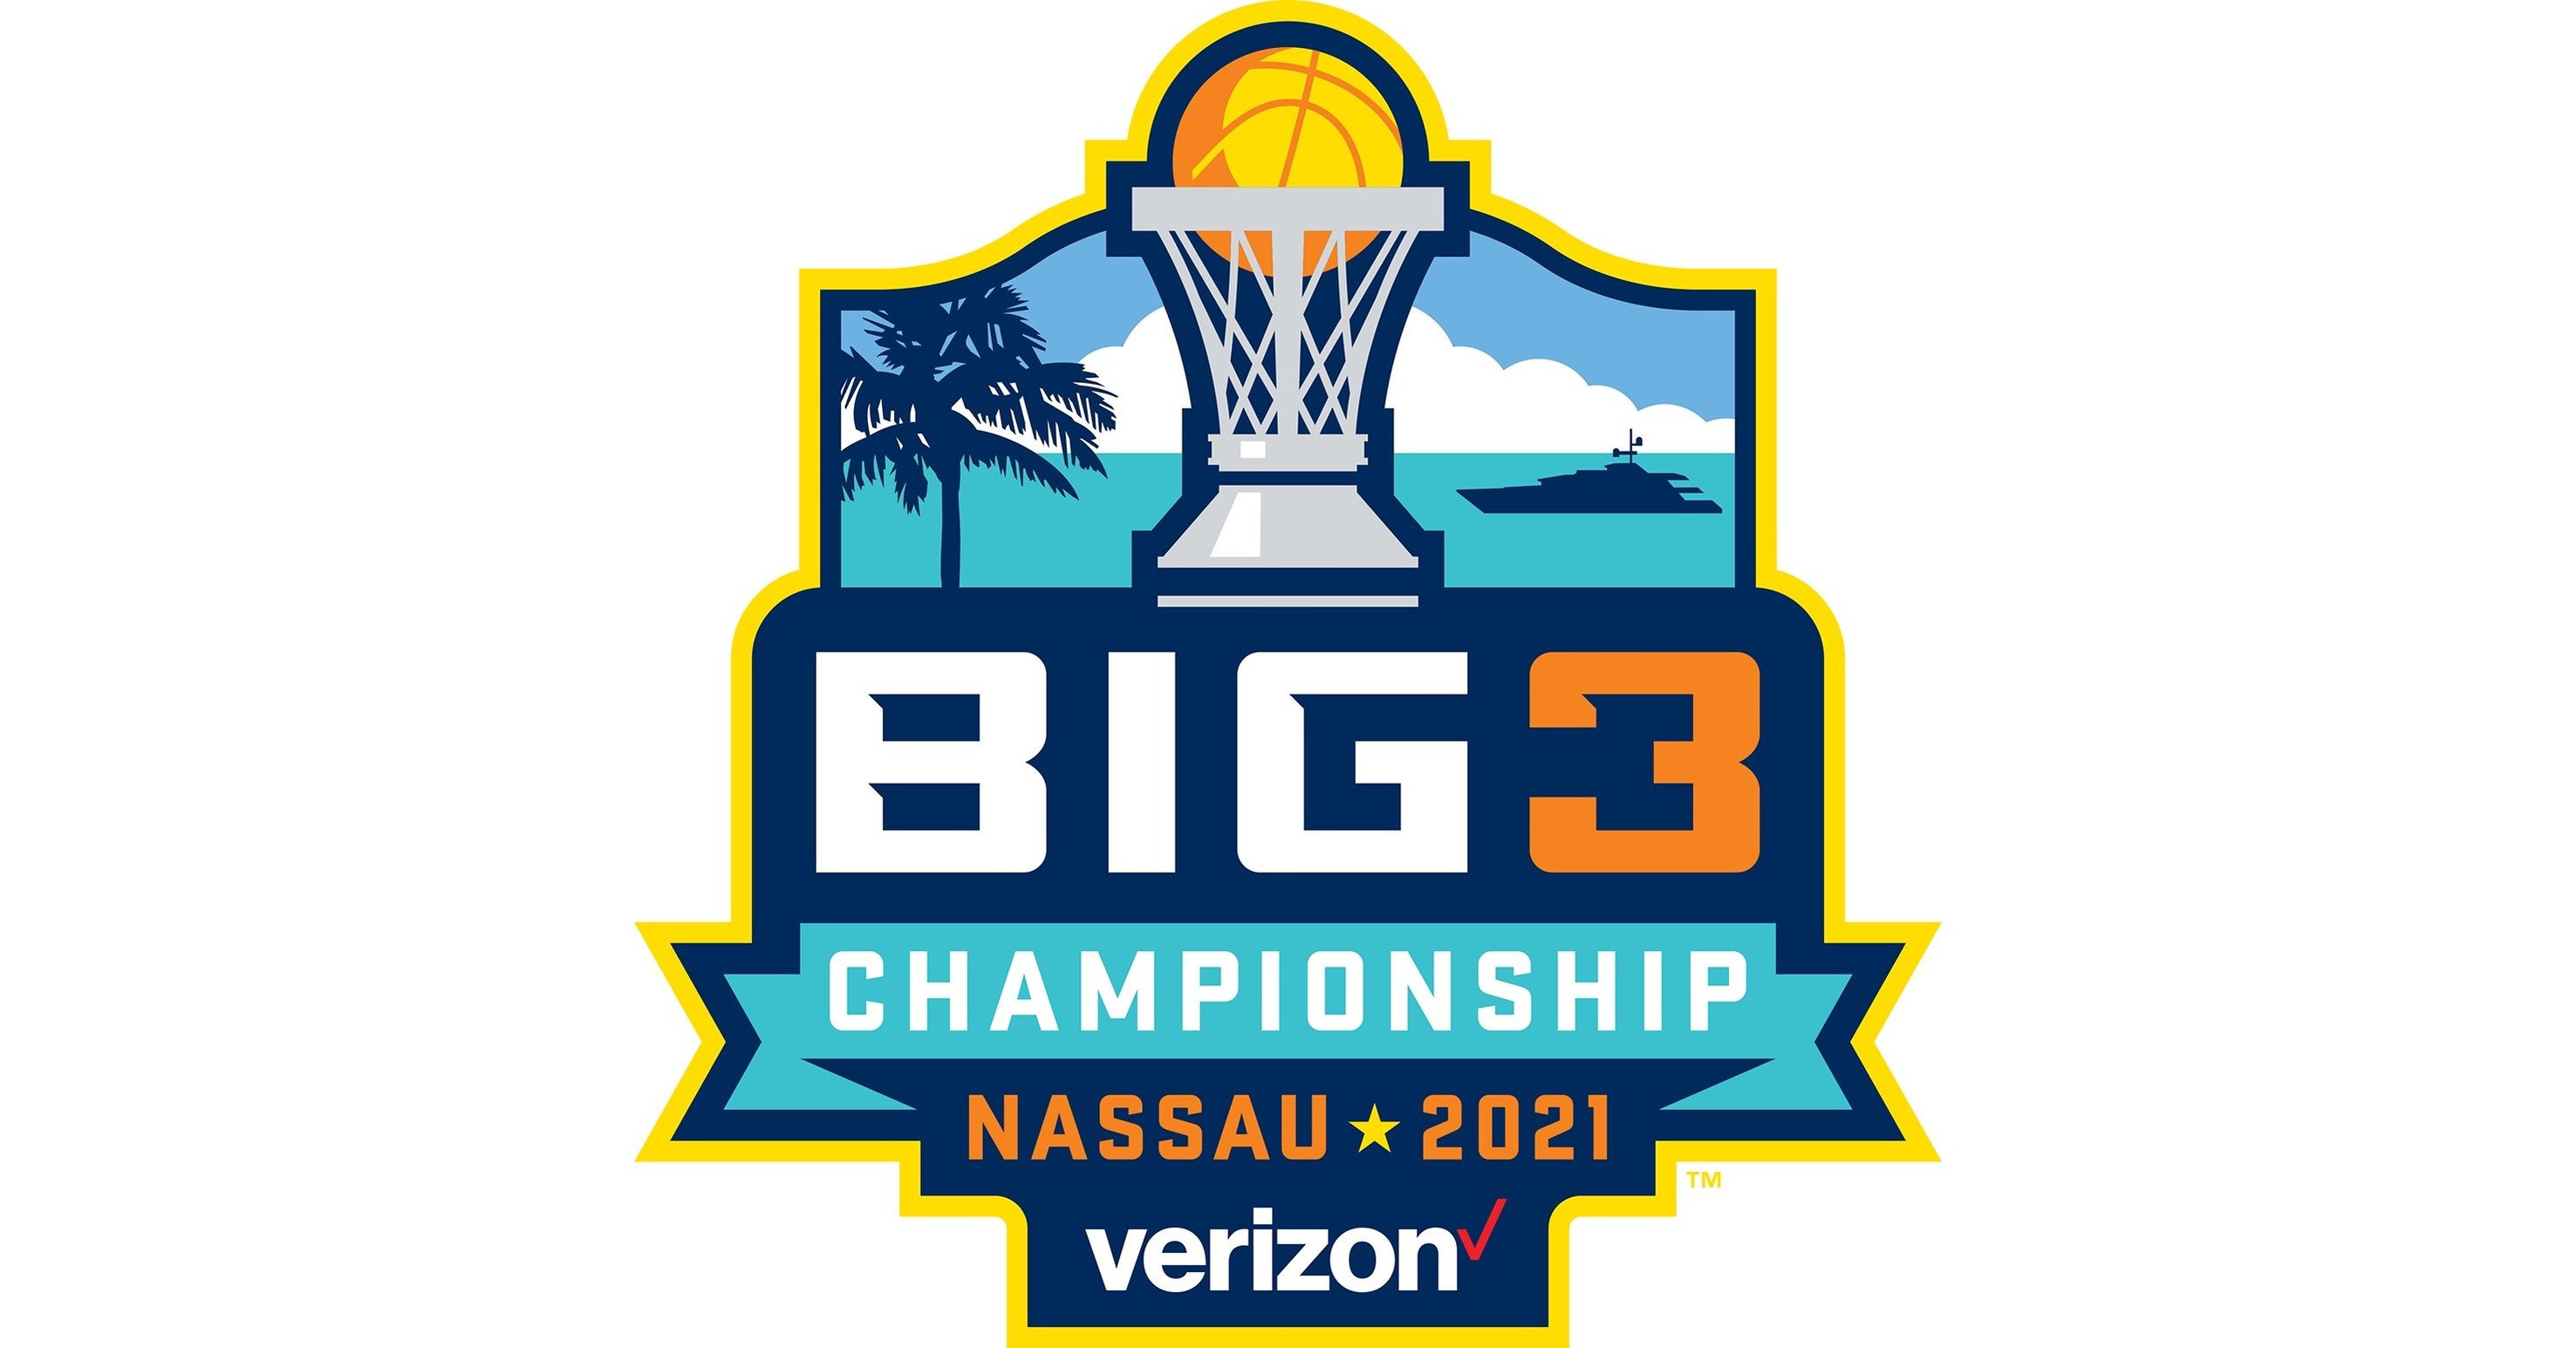 BIG3 Brings The Fire As It Announces Legendary Matchups And